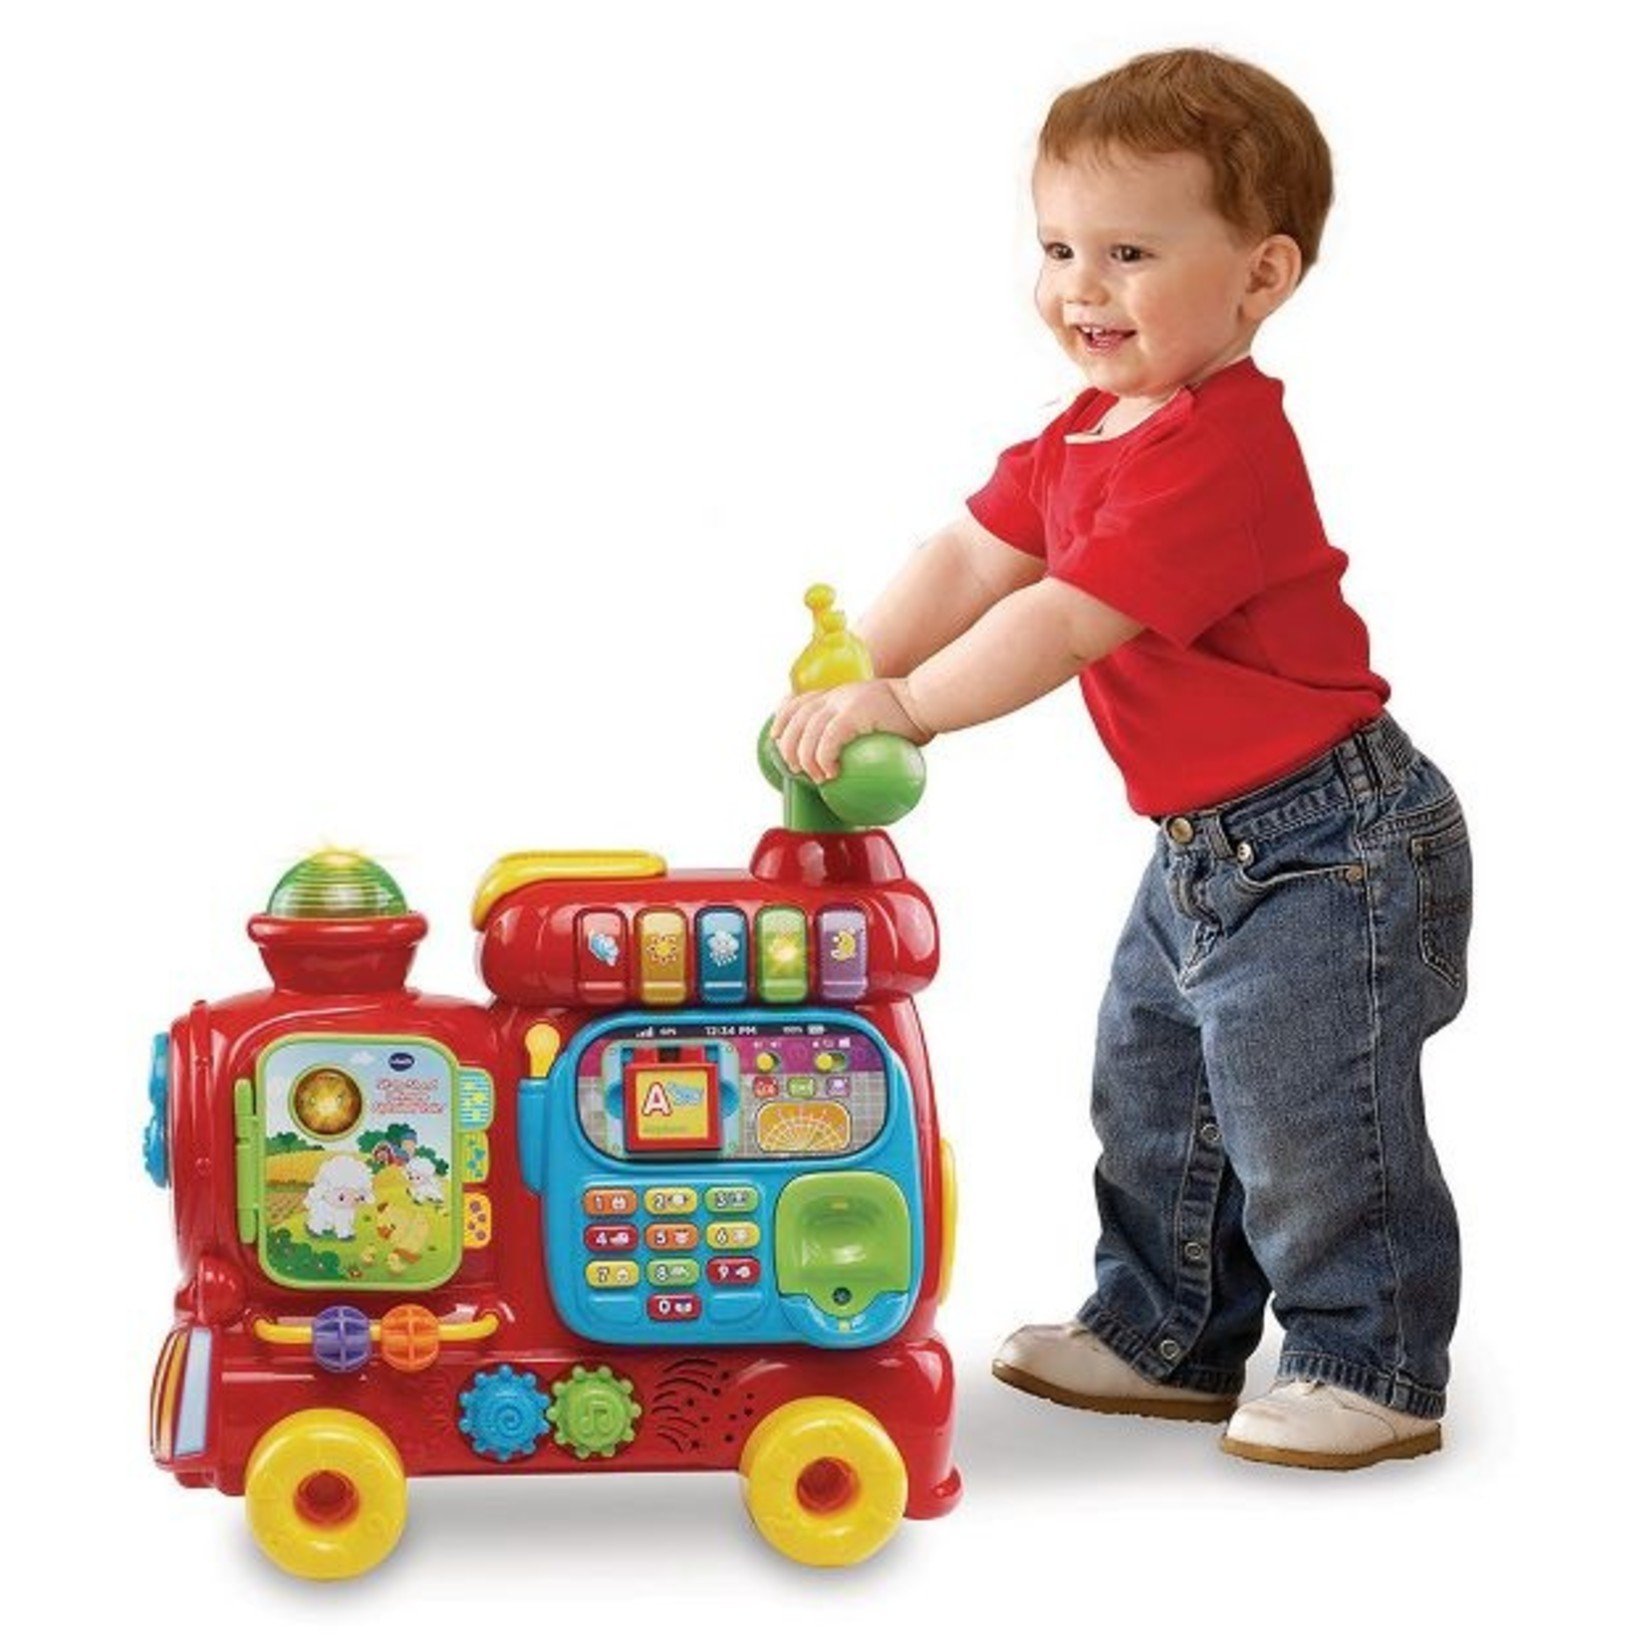 VTech Sit-to-Stand Ultimate Alphabet Train